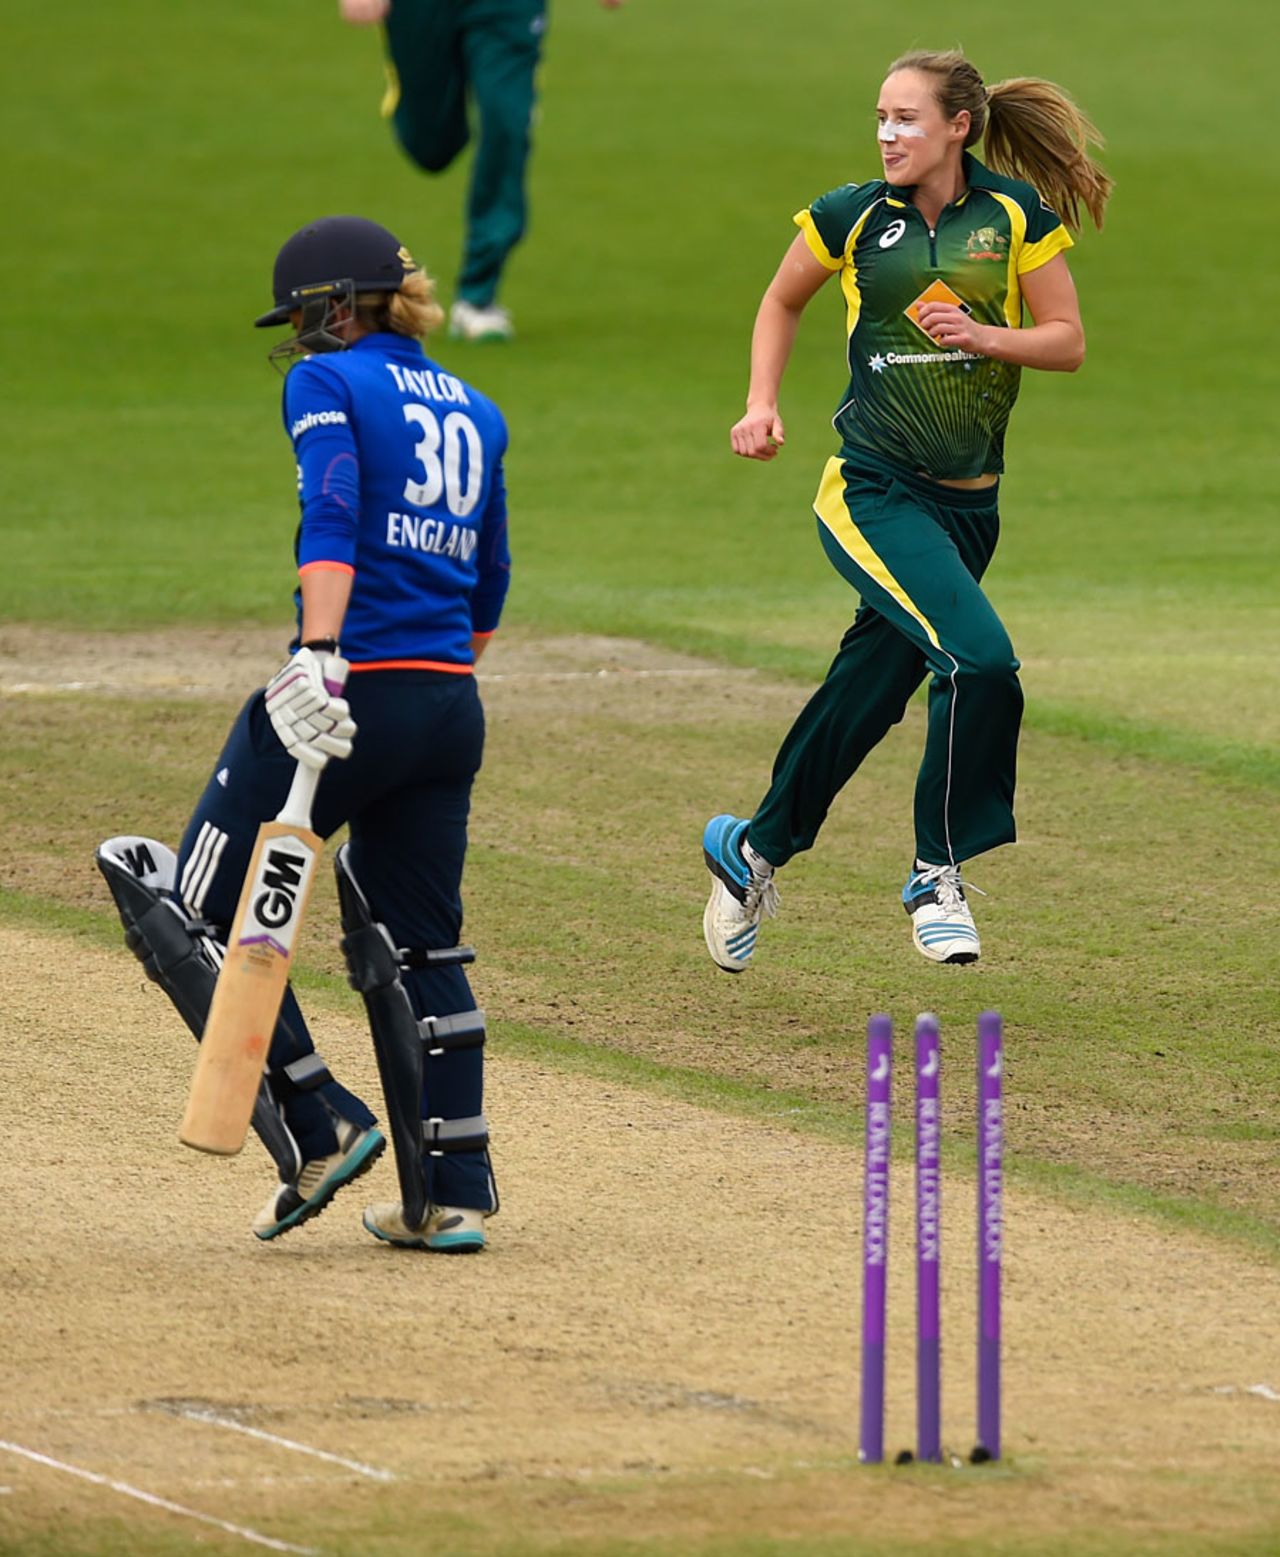 Ellyse Perry made significant inroads into England's top order, England Women v Australia Women, 3rd ODI, New Road, July 27, 2015